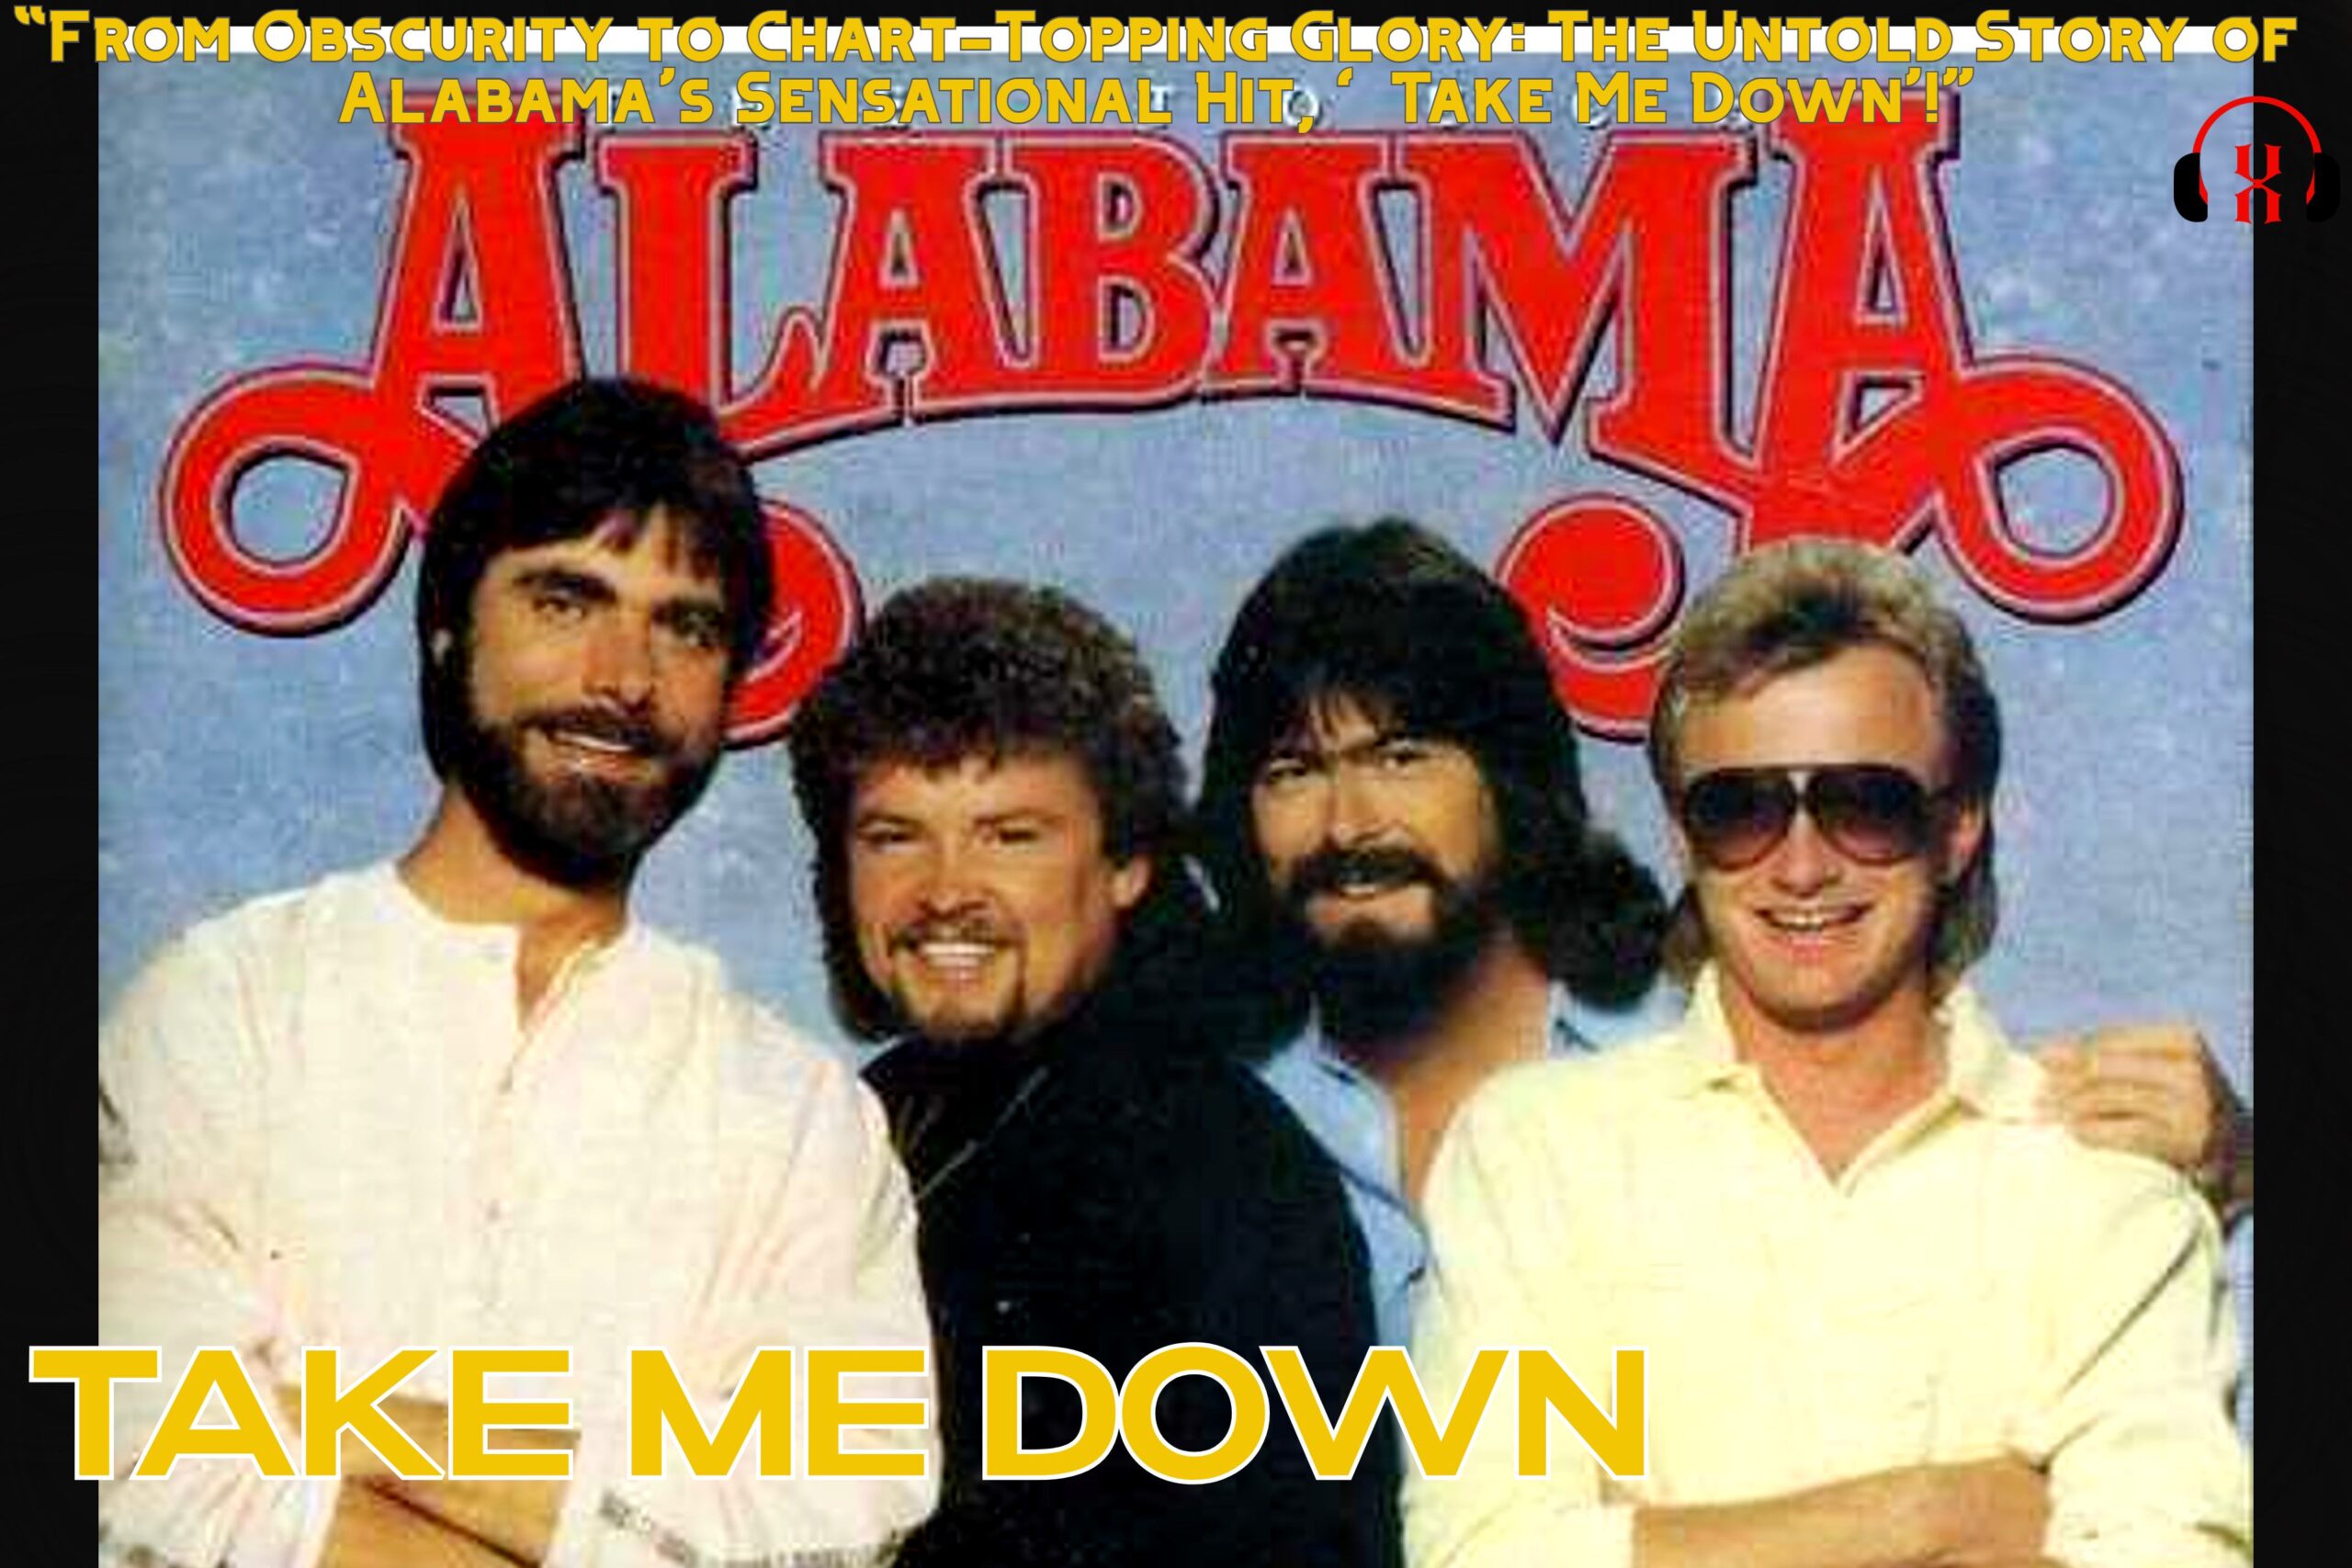 “From Obscurity to Chart-Topping Glory: The Untold Story of Alabama’s Sensational Hit, ‘Take Me Down’!”